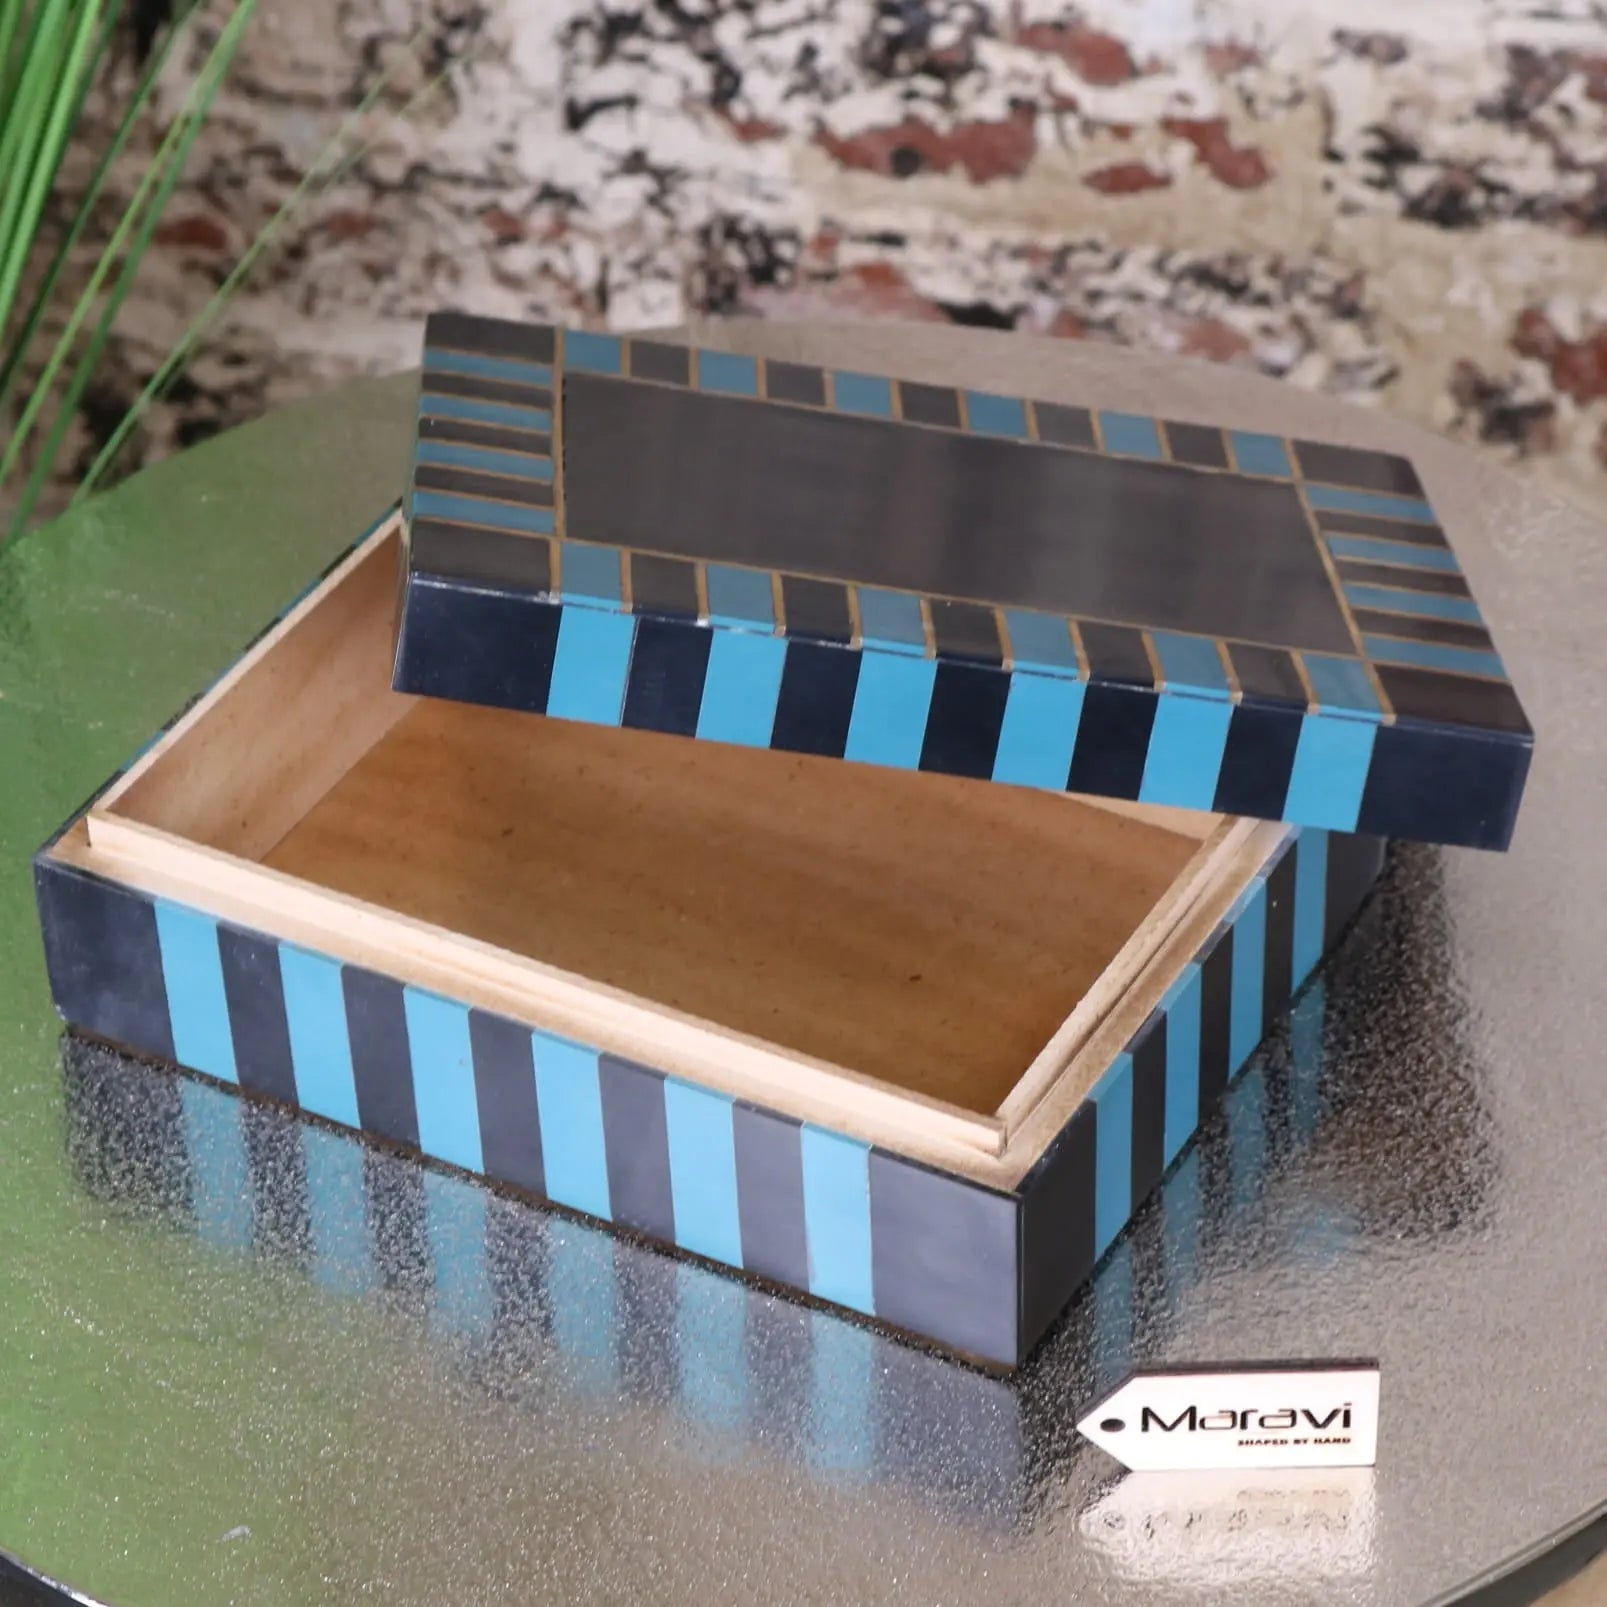 Panna Luxe Resin Jewellery Box - Blue Opened Up